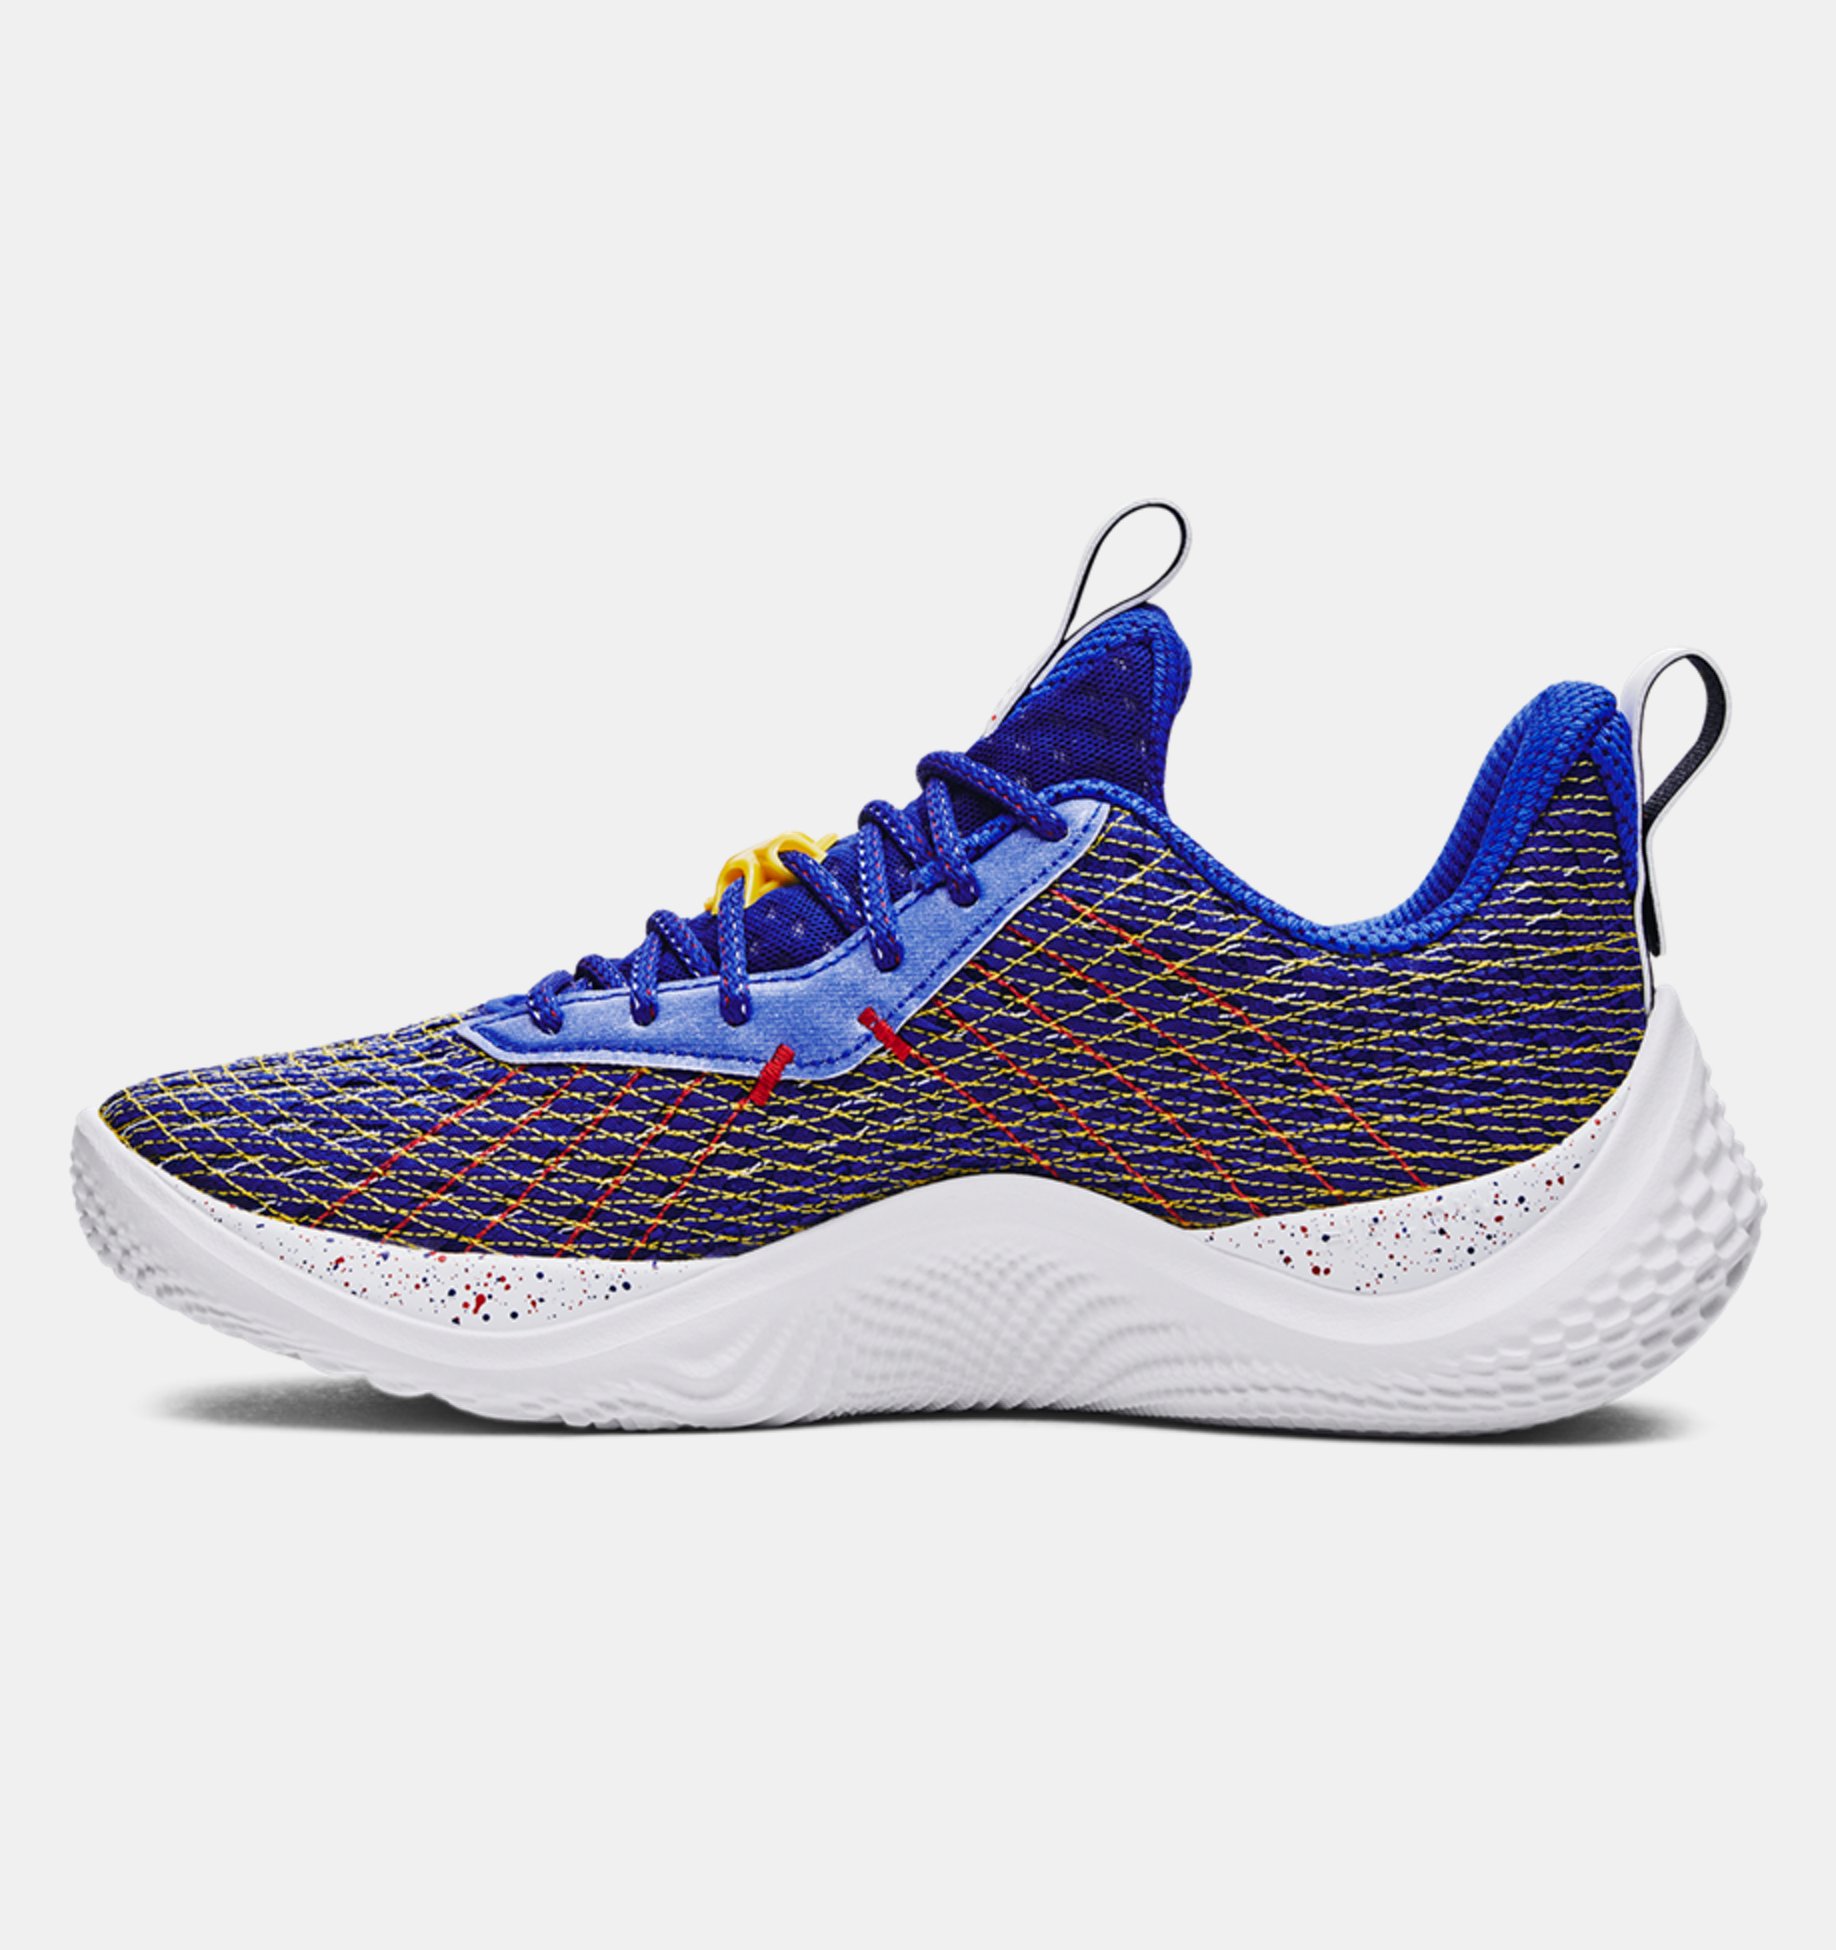 Unisex Curry Flow 10 'Curry-fornia' Basketball Shoes